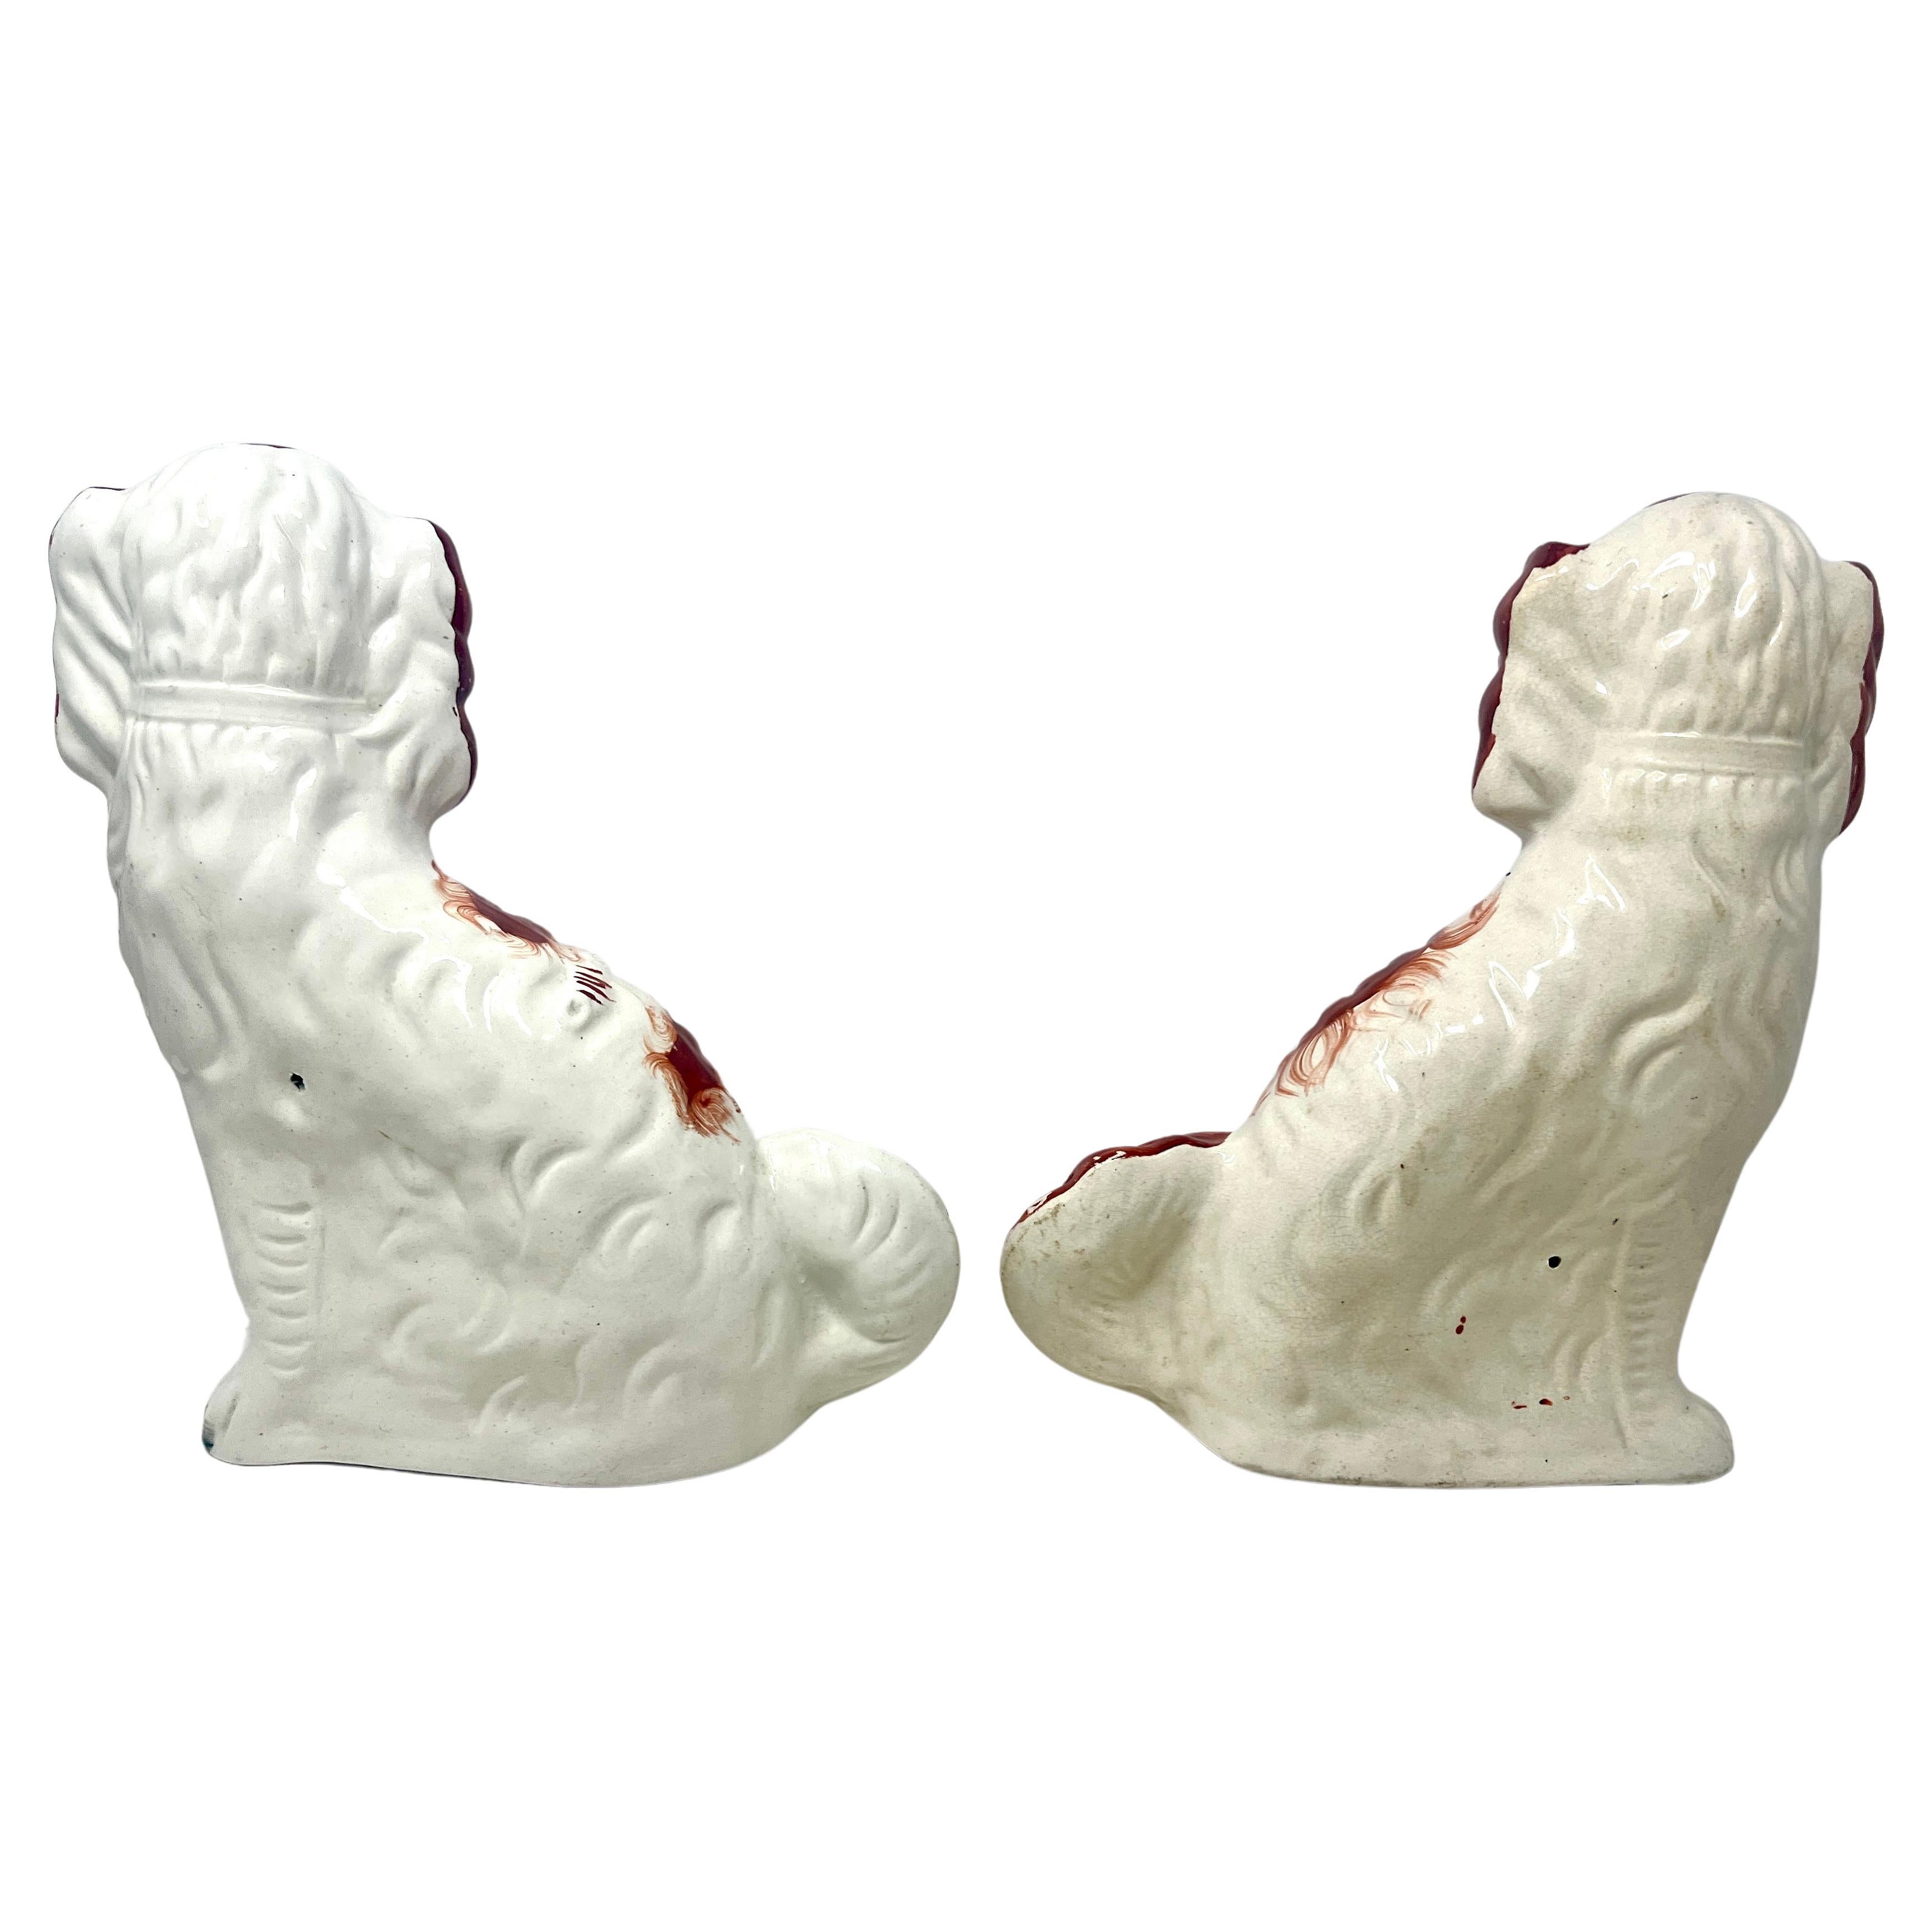 19th Century Pair of Antique English Staffordshire Pottery Dogs, Circa 1830. For Sale